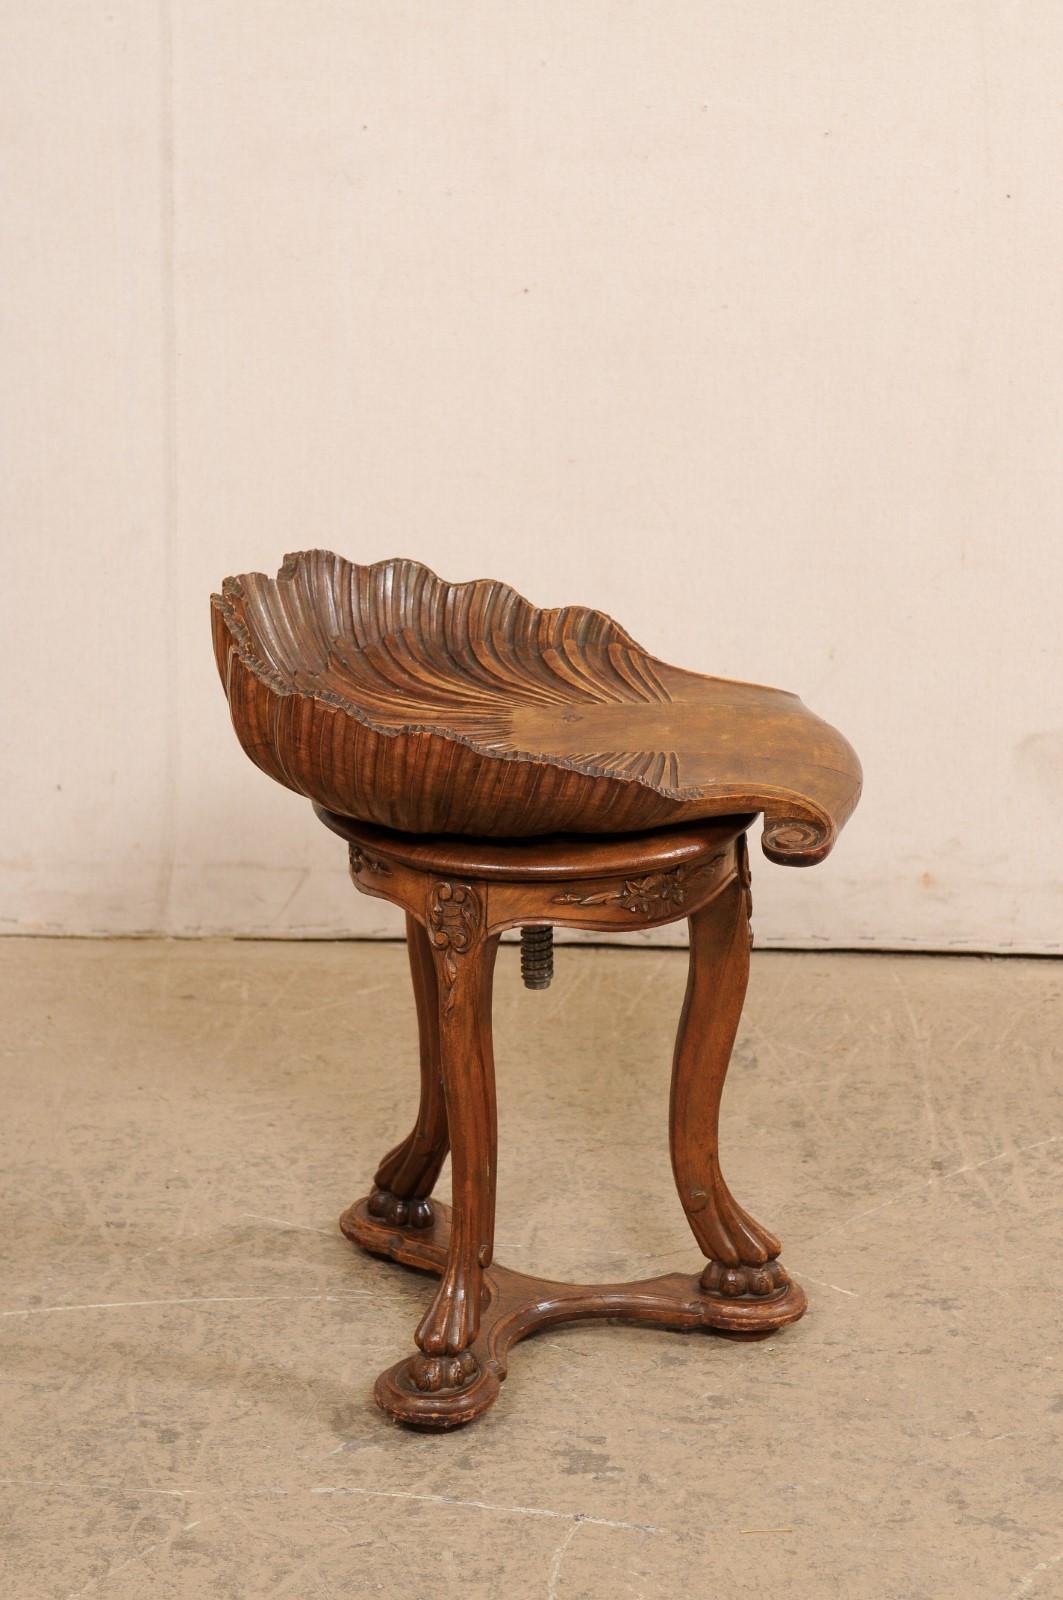 20th Century Italian Antique Wooden Grotto Stool w/Carved-Shell Seat For Sale